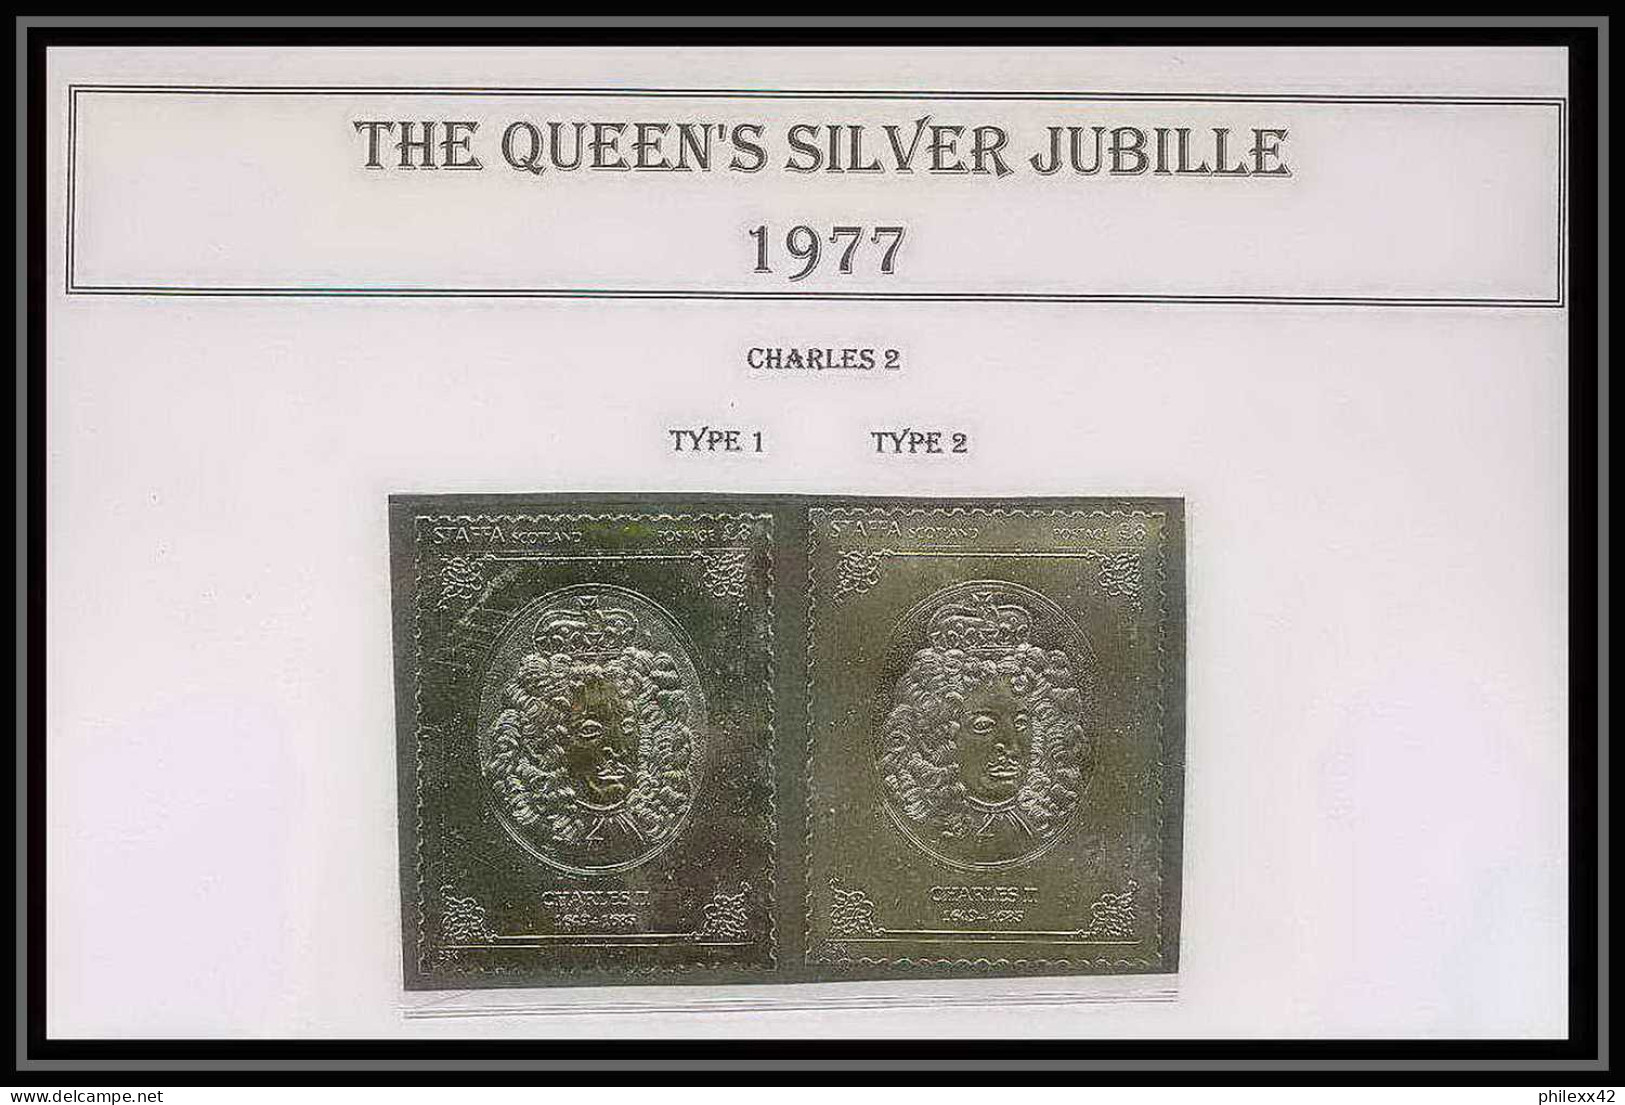 446a Staffa Scotland The Queen's Silver Jubilee 1977 OR Gold Stamps Monarchy United Kingdom Charles 2 Type 1&2 ** - Emisiones Locales